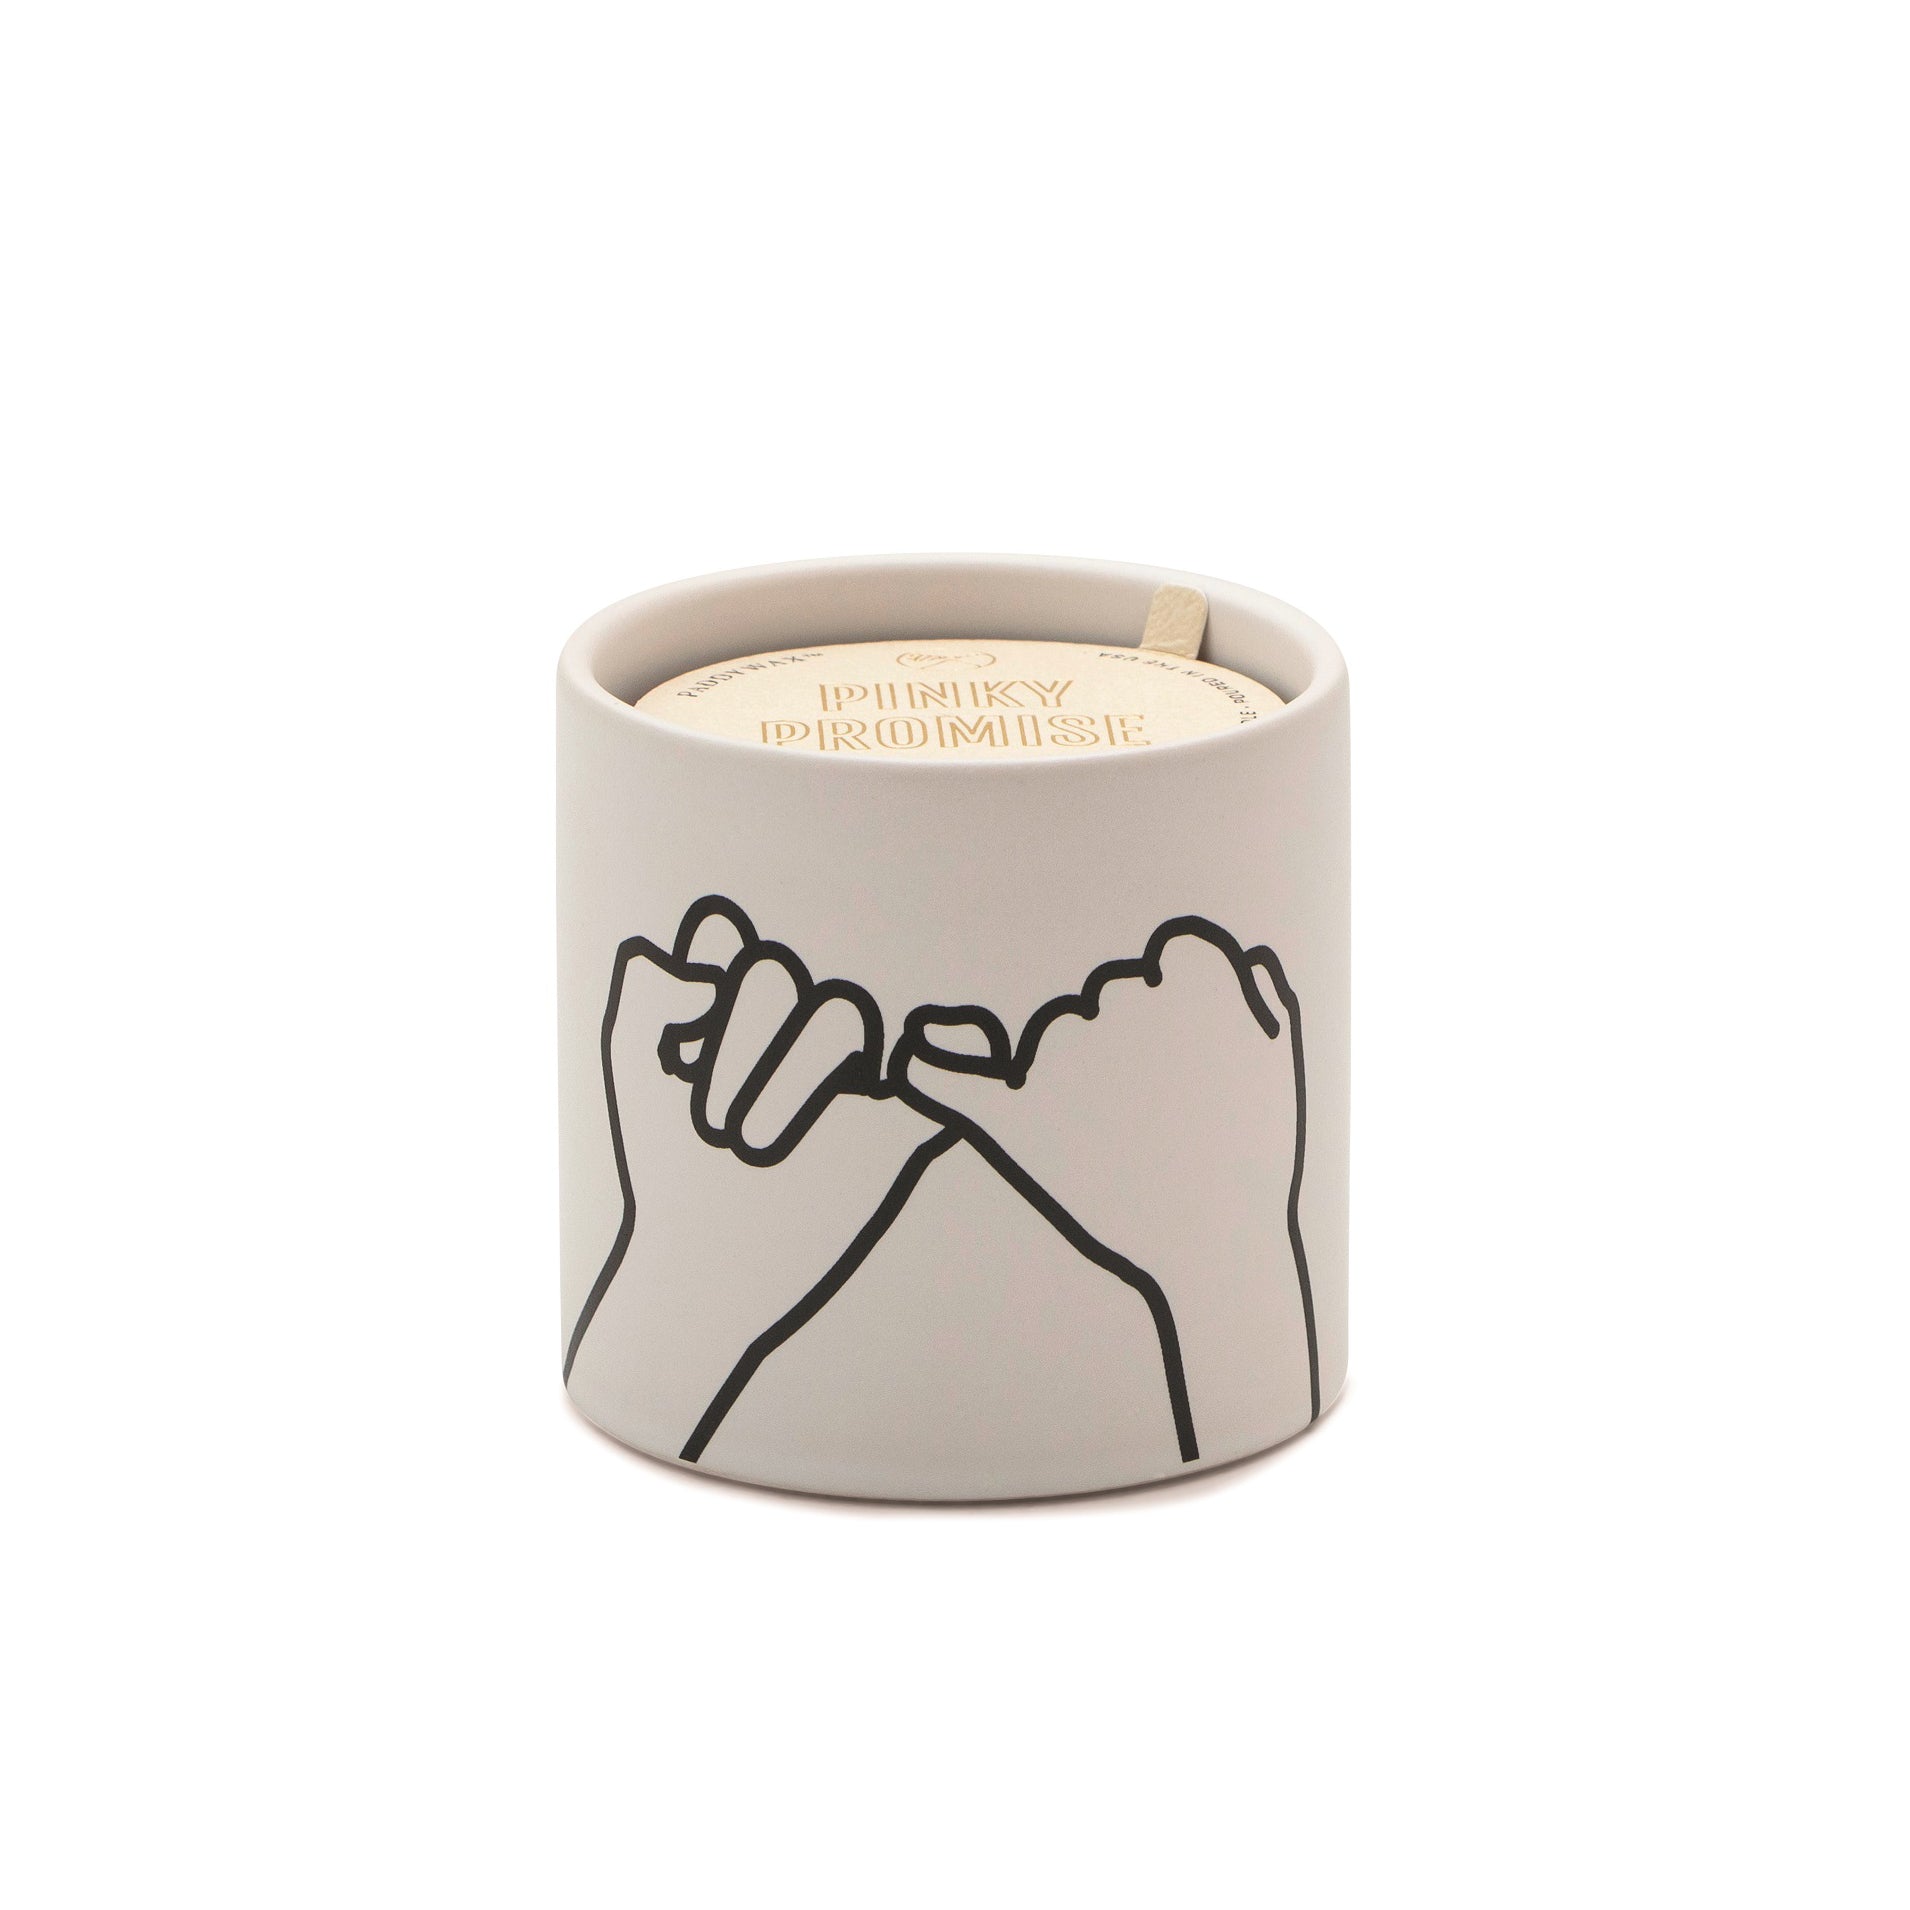 Paddy Wax Impressions Ceramic Candle (163g) - White - Pinky Promise - Wild Fig & Cedar